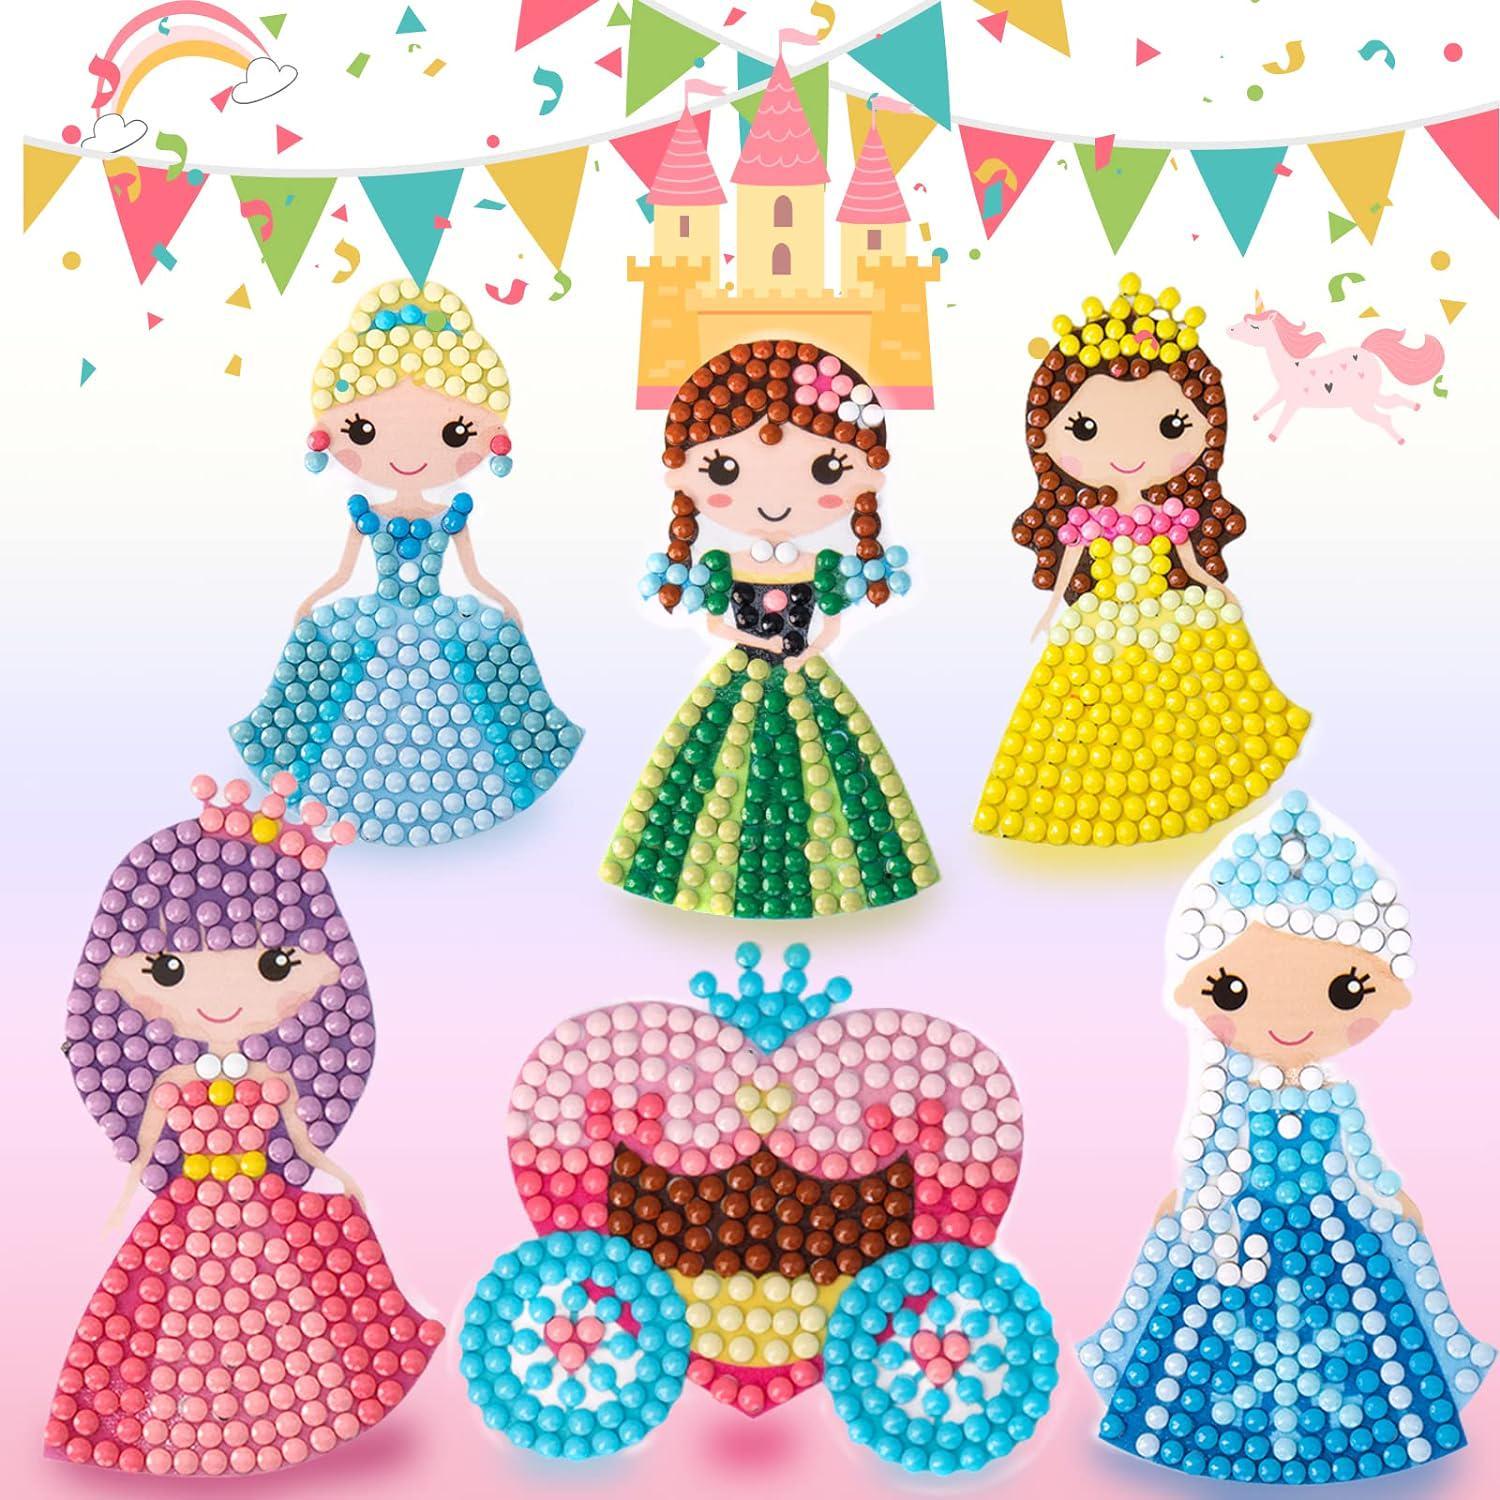 20pcs 5D Diamond Painting Stickers Kits for Kids - Cute Cartoon Dessert  Theme - Arts and Crafts for Kids Ages 8-12 Being Creative to Gem DIY  Diamond Sticker to Be Kids' Birthday